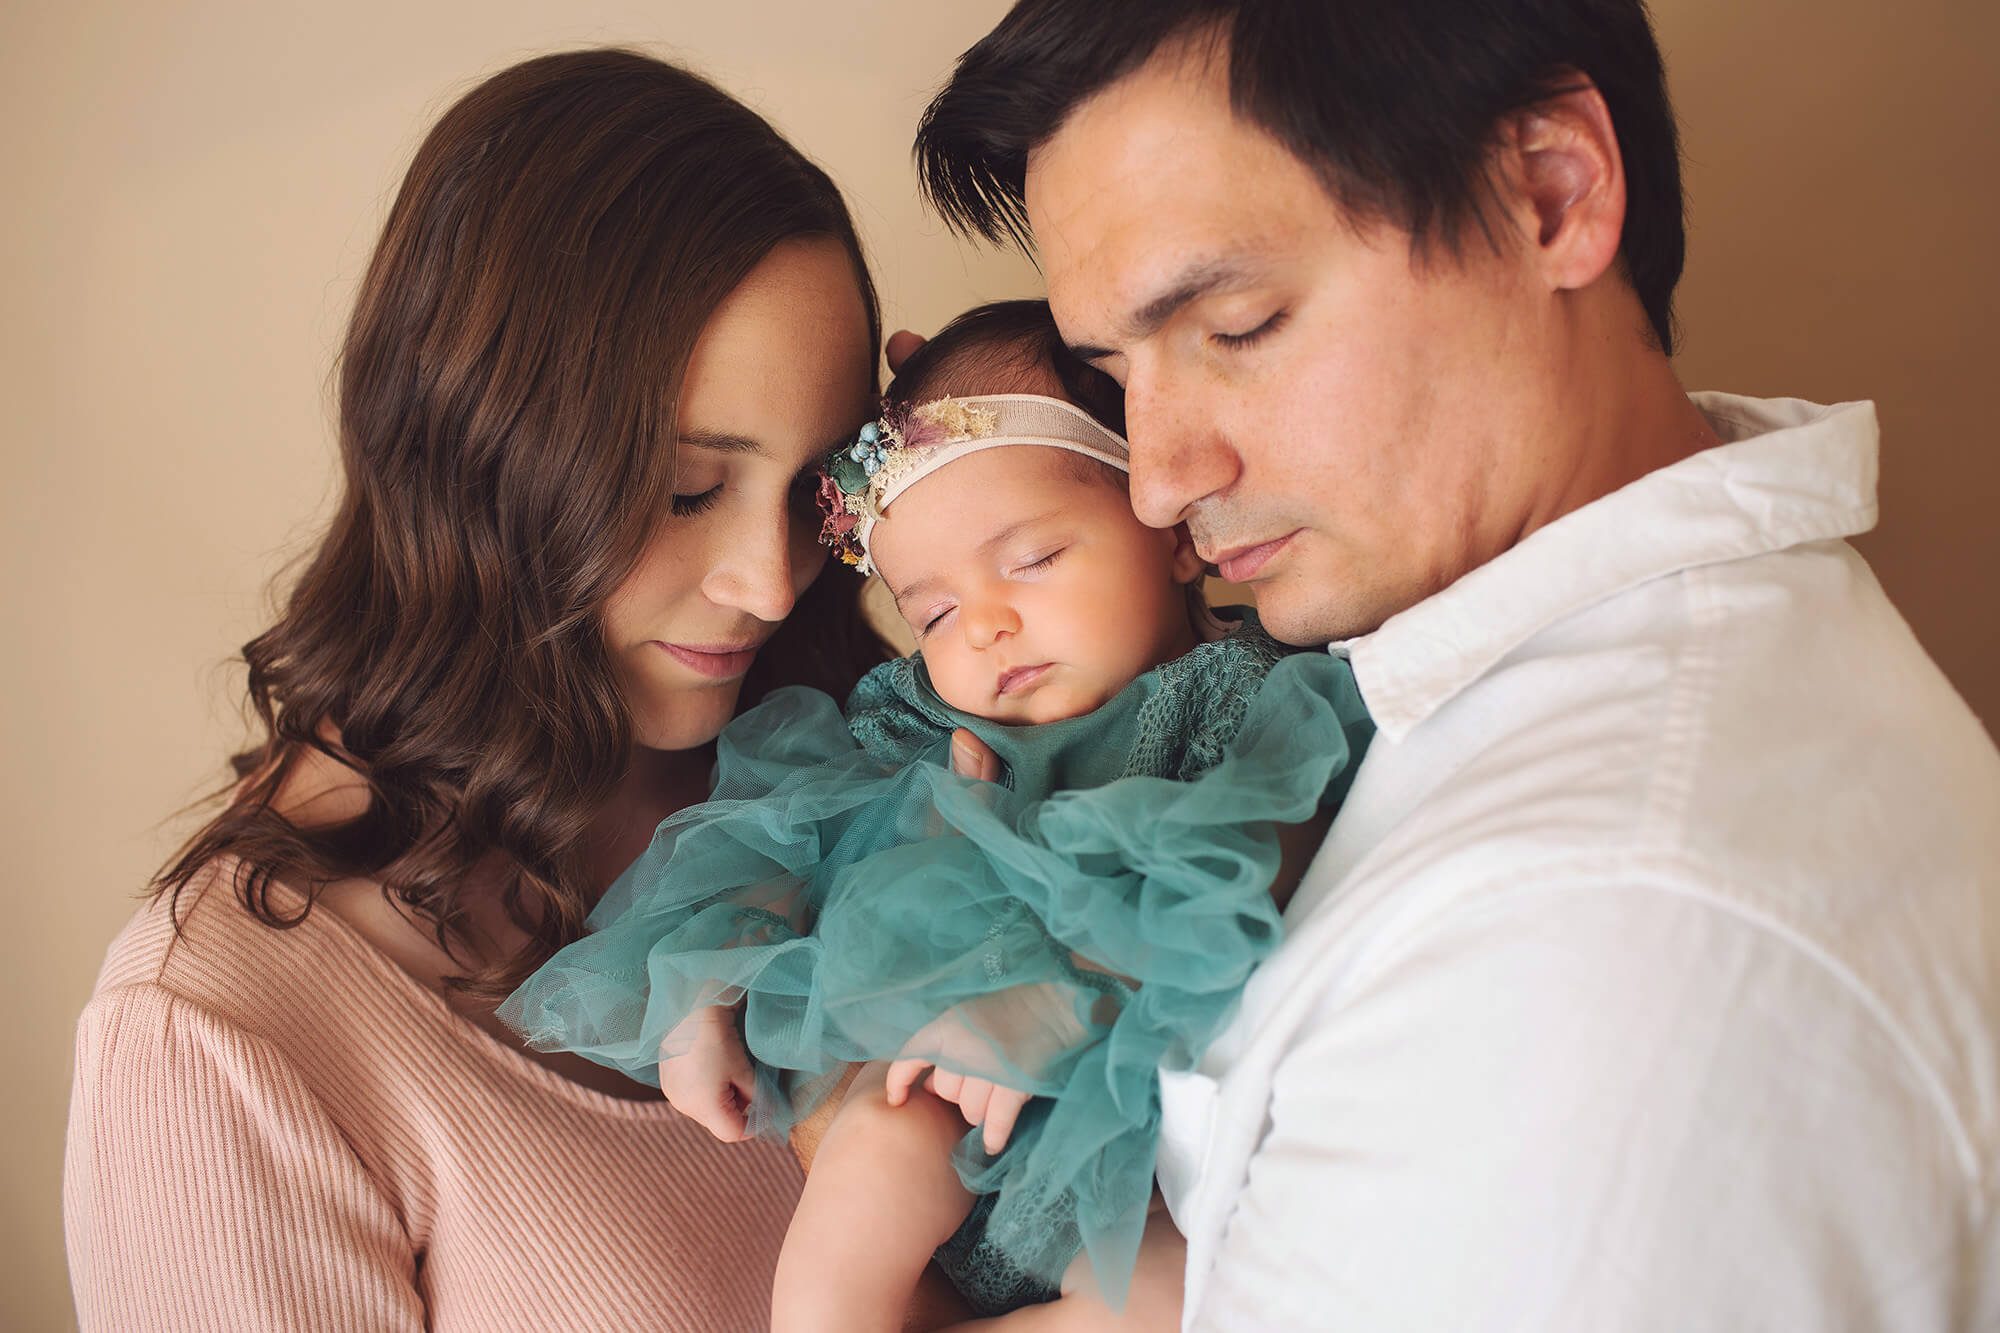 Mom, Dad, and baby Amelia snuggle together